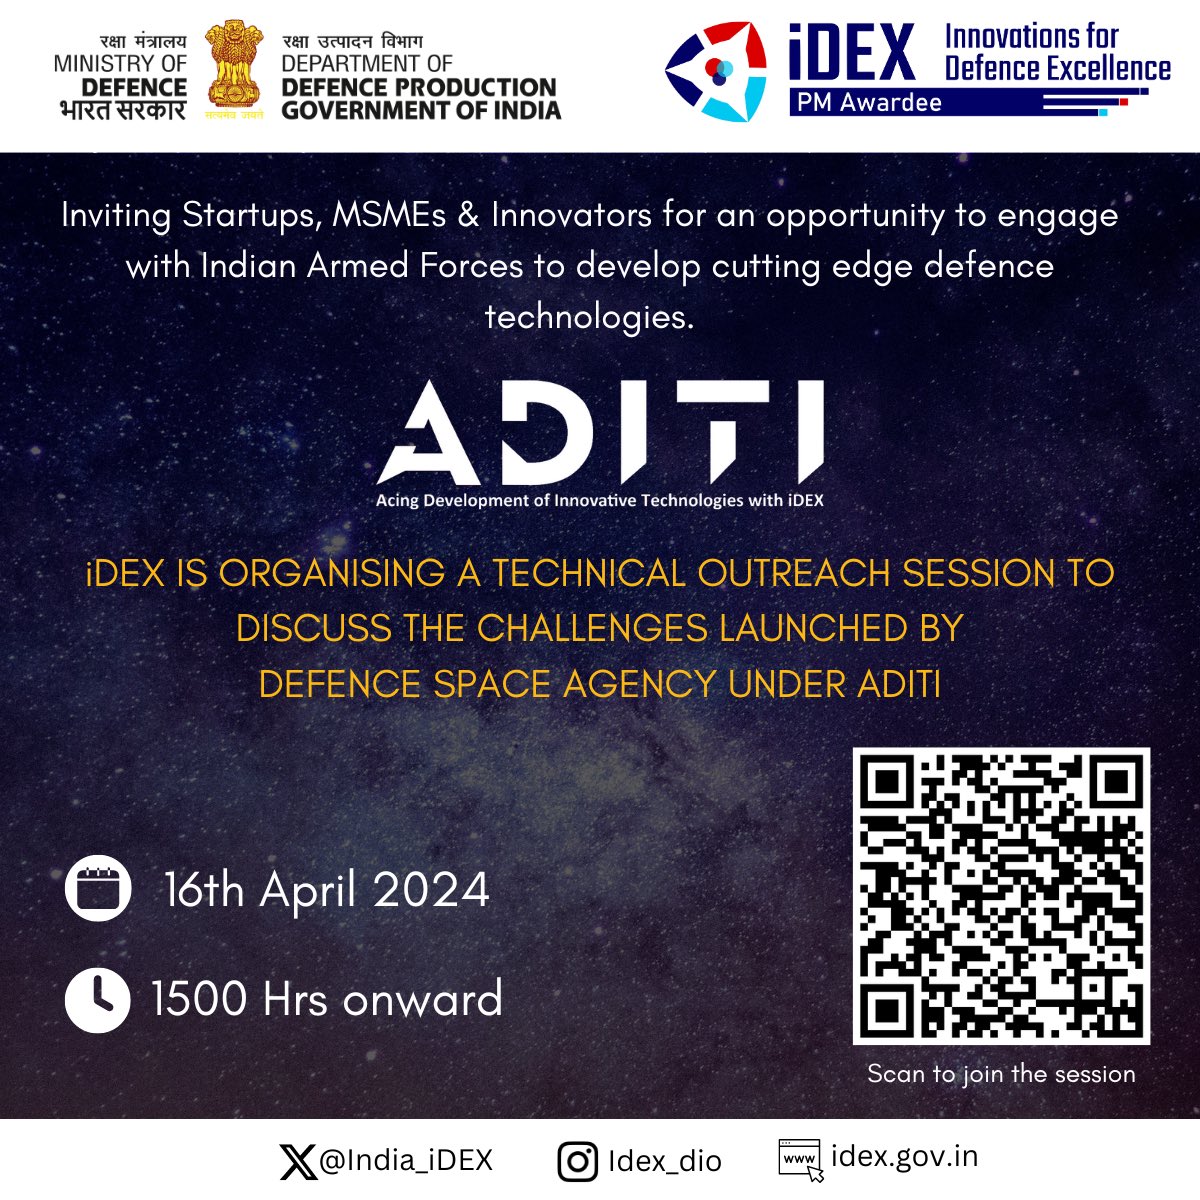 Calling all #space-tech based #Innovators #Startups & #MSMEs Don't miss out on the technical outreach session discussing Defence Space Agency (DSA) specific Challenges under the #ADITI scheme Join us on 16th April 2024 | 3:00 PM onwards. Link to join: idex-dio.webex.com/idex-dio/j.php… 👇🏻